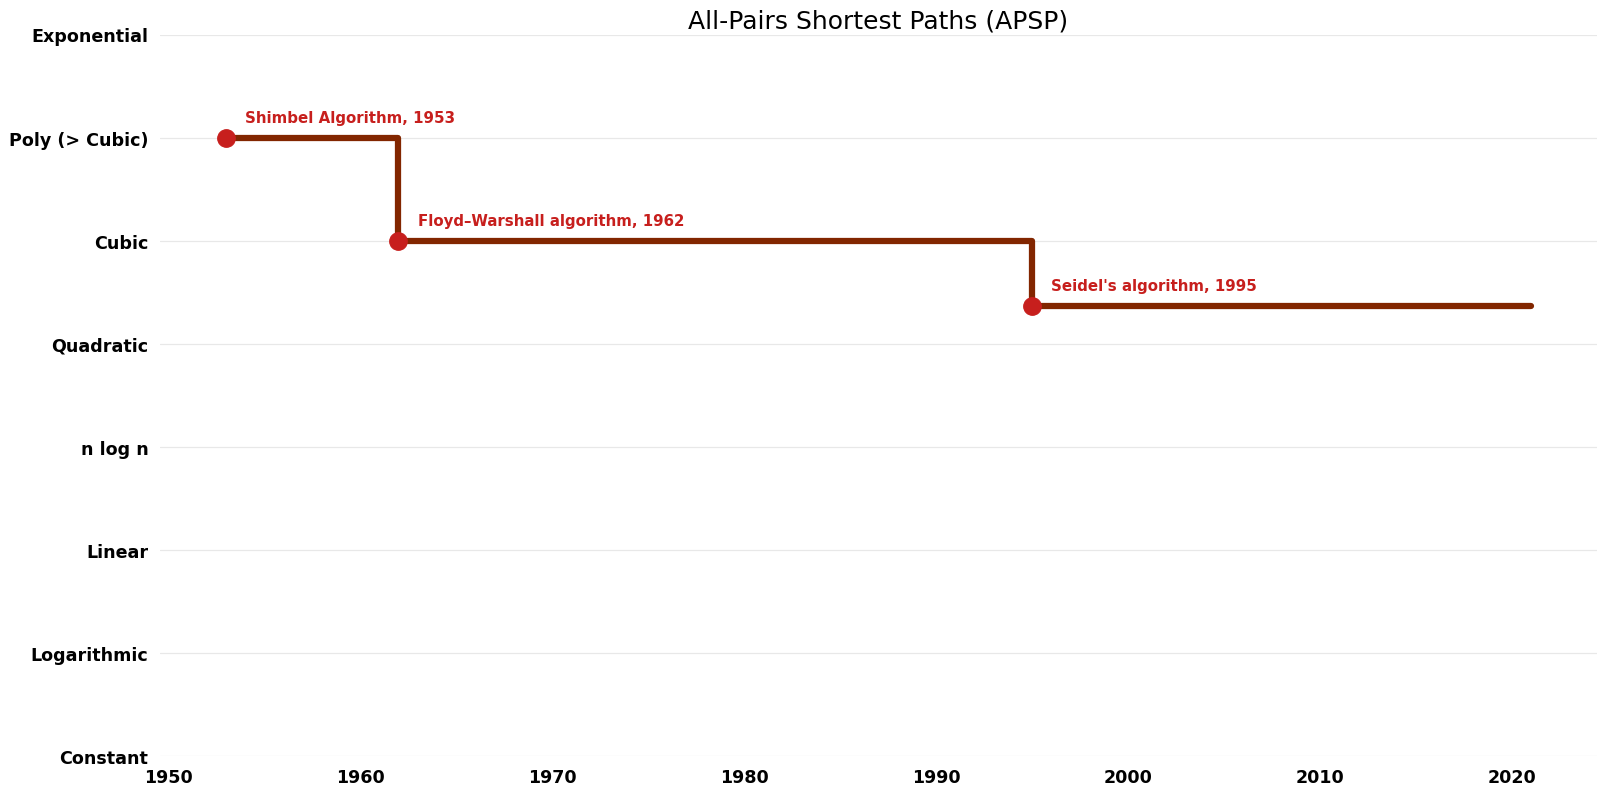 All-Pairs Shortest Paths (APSP) - Time.png